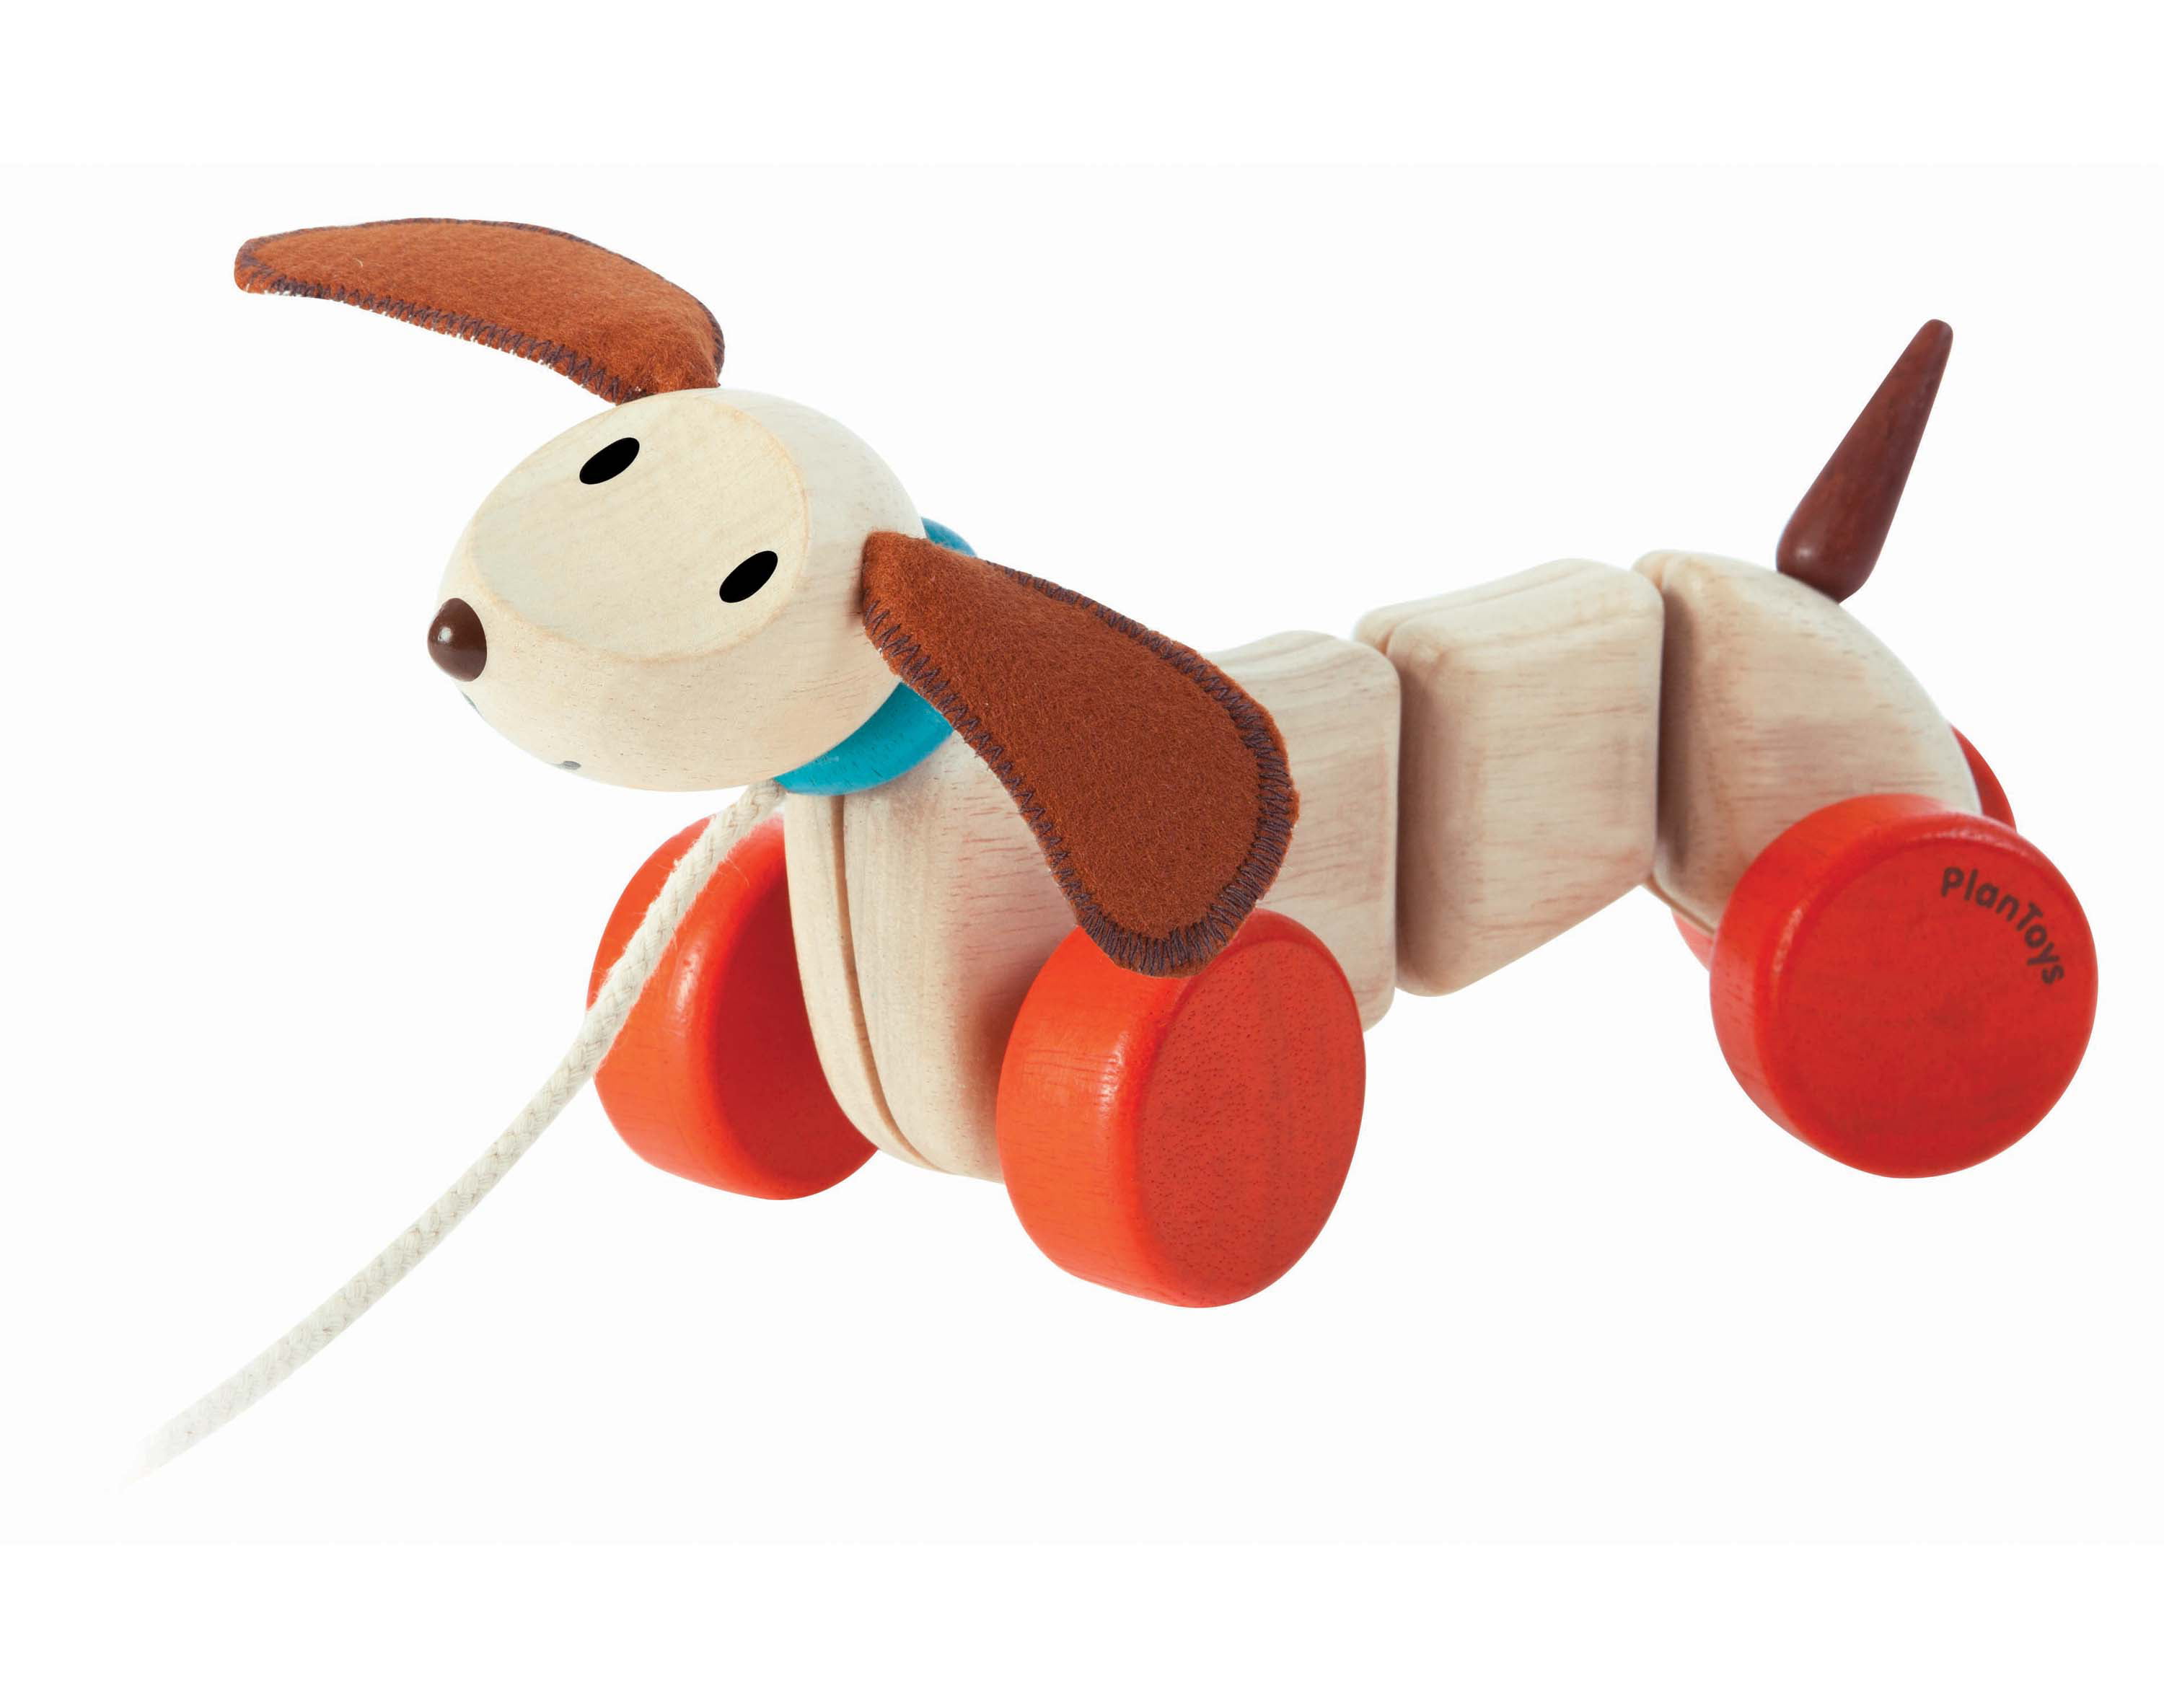  Melissa and Doug Playful Puppy Wooden Pull Toy #3028 New! 